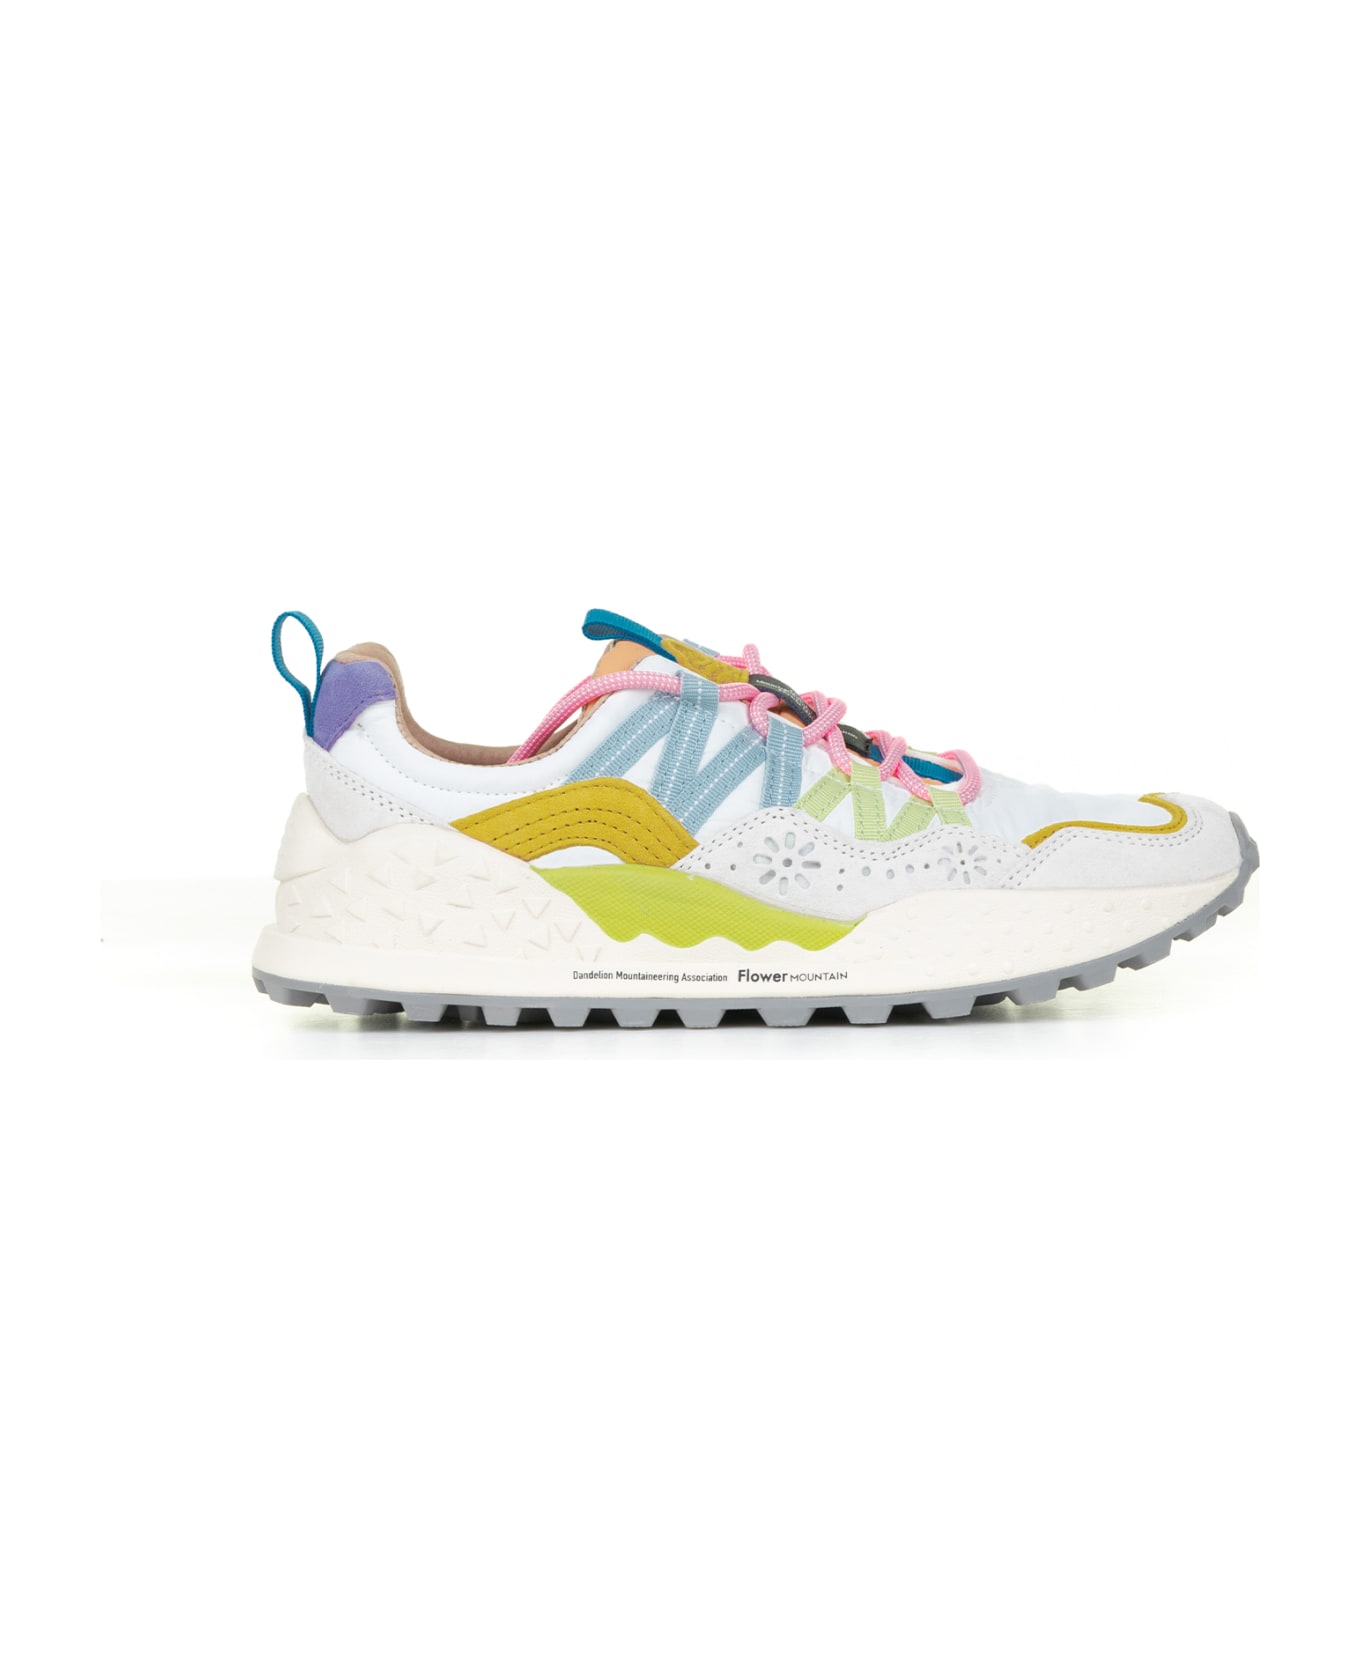 Flower Mountain Multicolored Washi Sneakers In Suede And Nylon - BEIGE WHITE MULTI